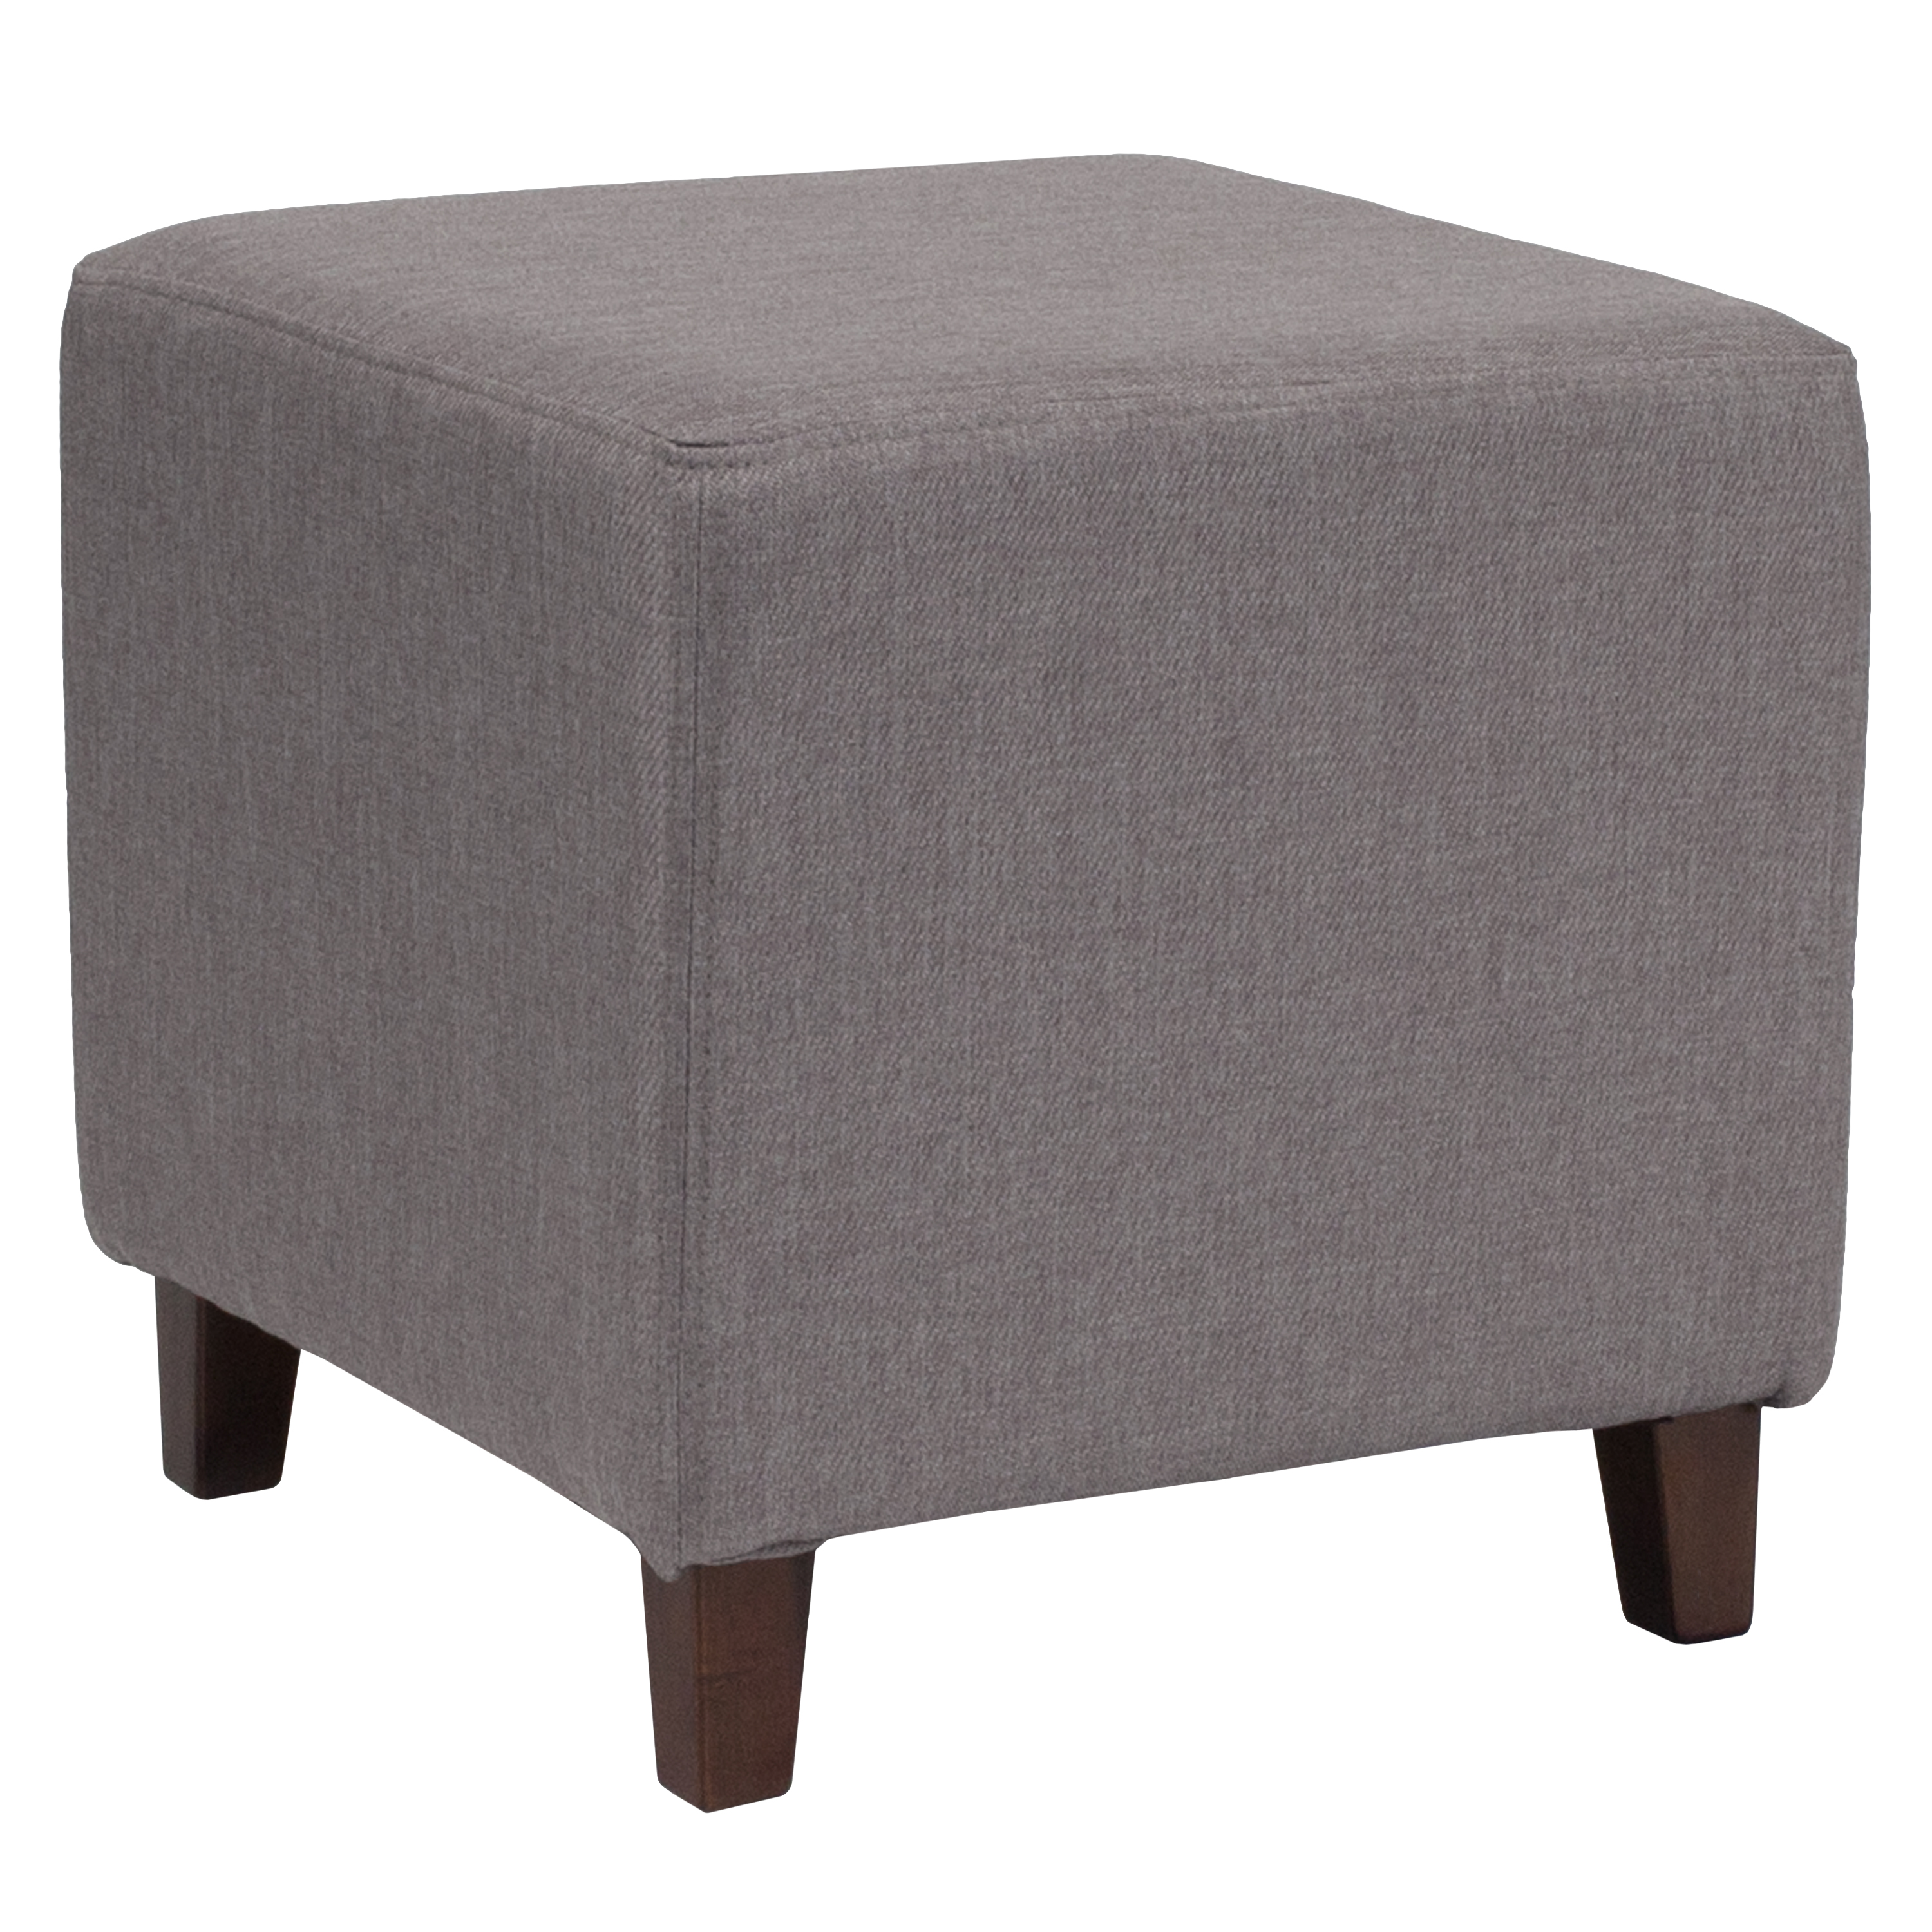 Flash Furniture QY-S09-LGY-GG Light Gray Upholstered Ottoman Pouf